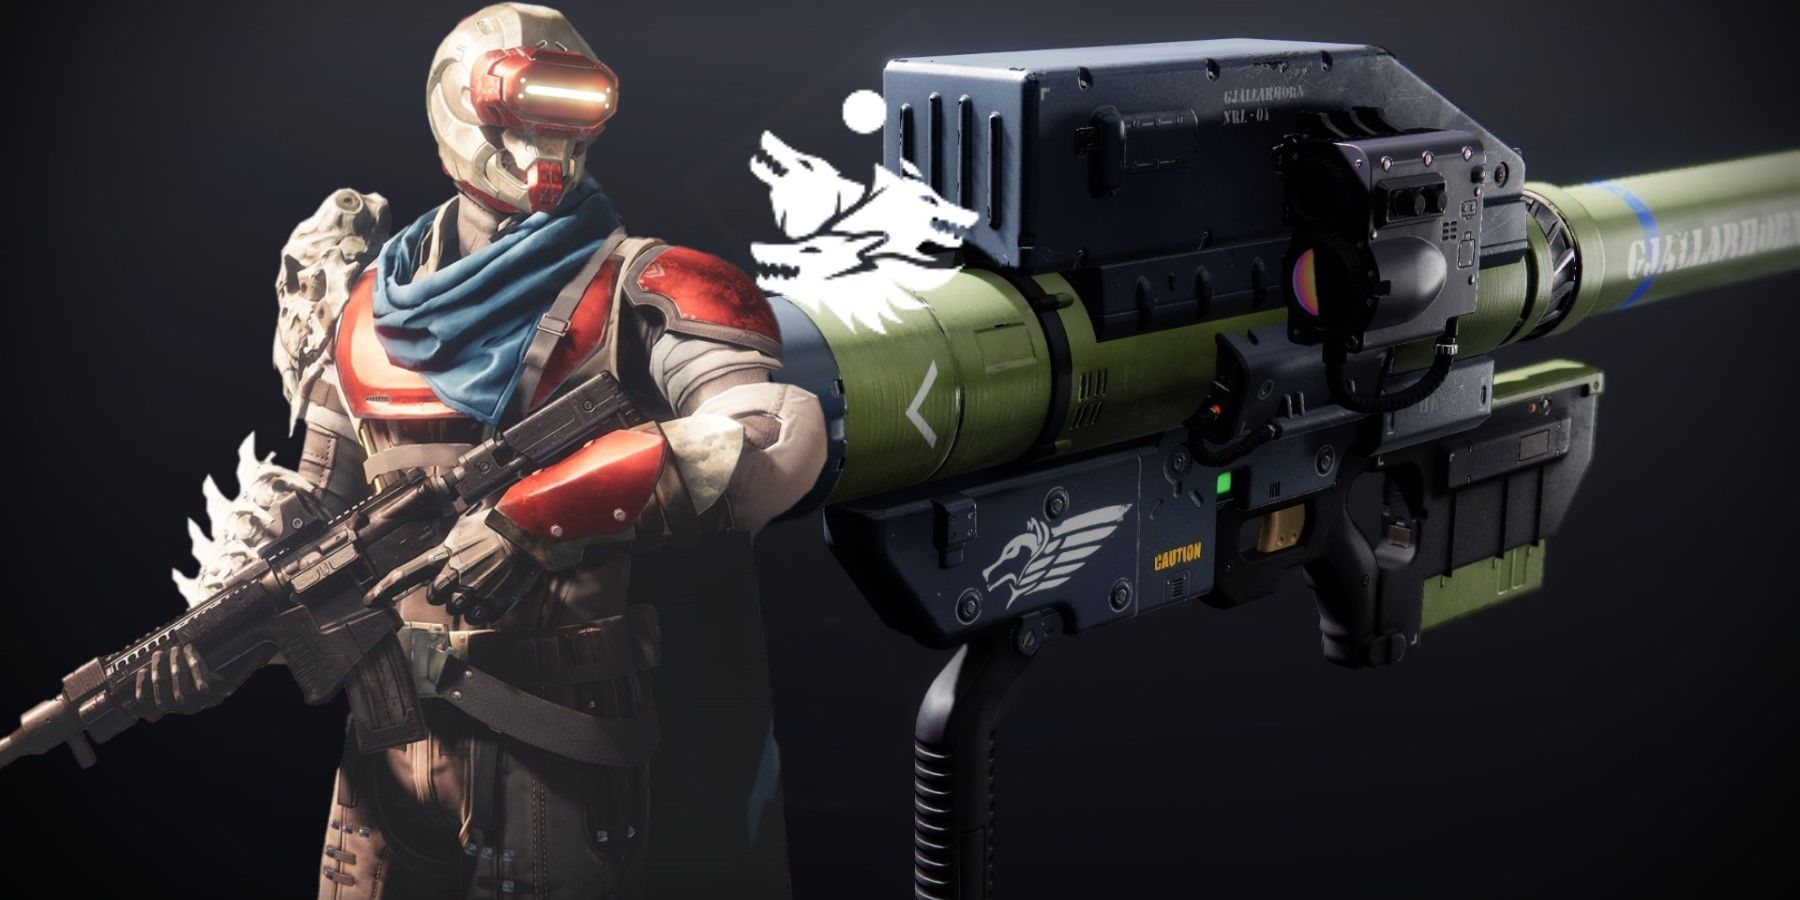 destiny 2 30th anniversary pack gjallarhorn reprised exotic rocket launcher new perk players happy wolfpak rounds pack hunter buff allies